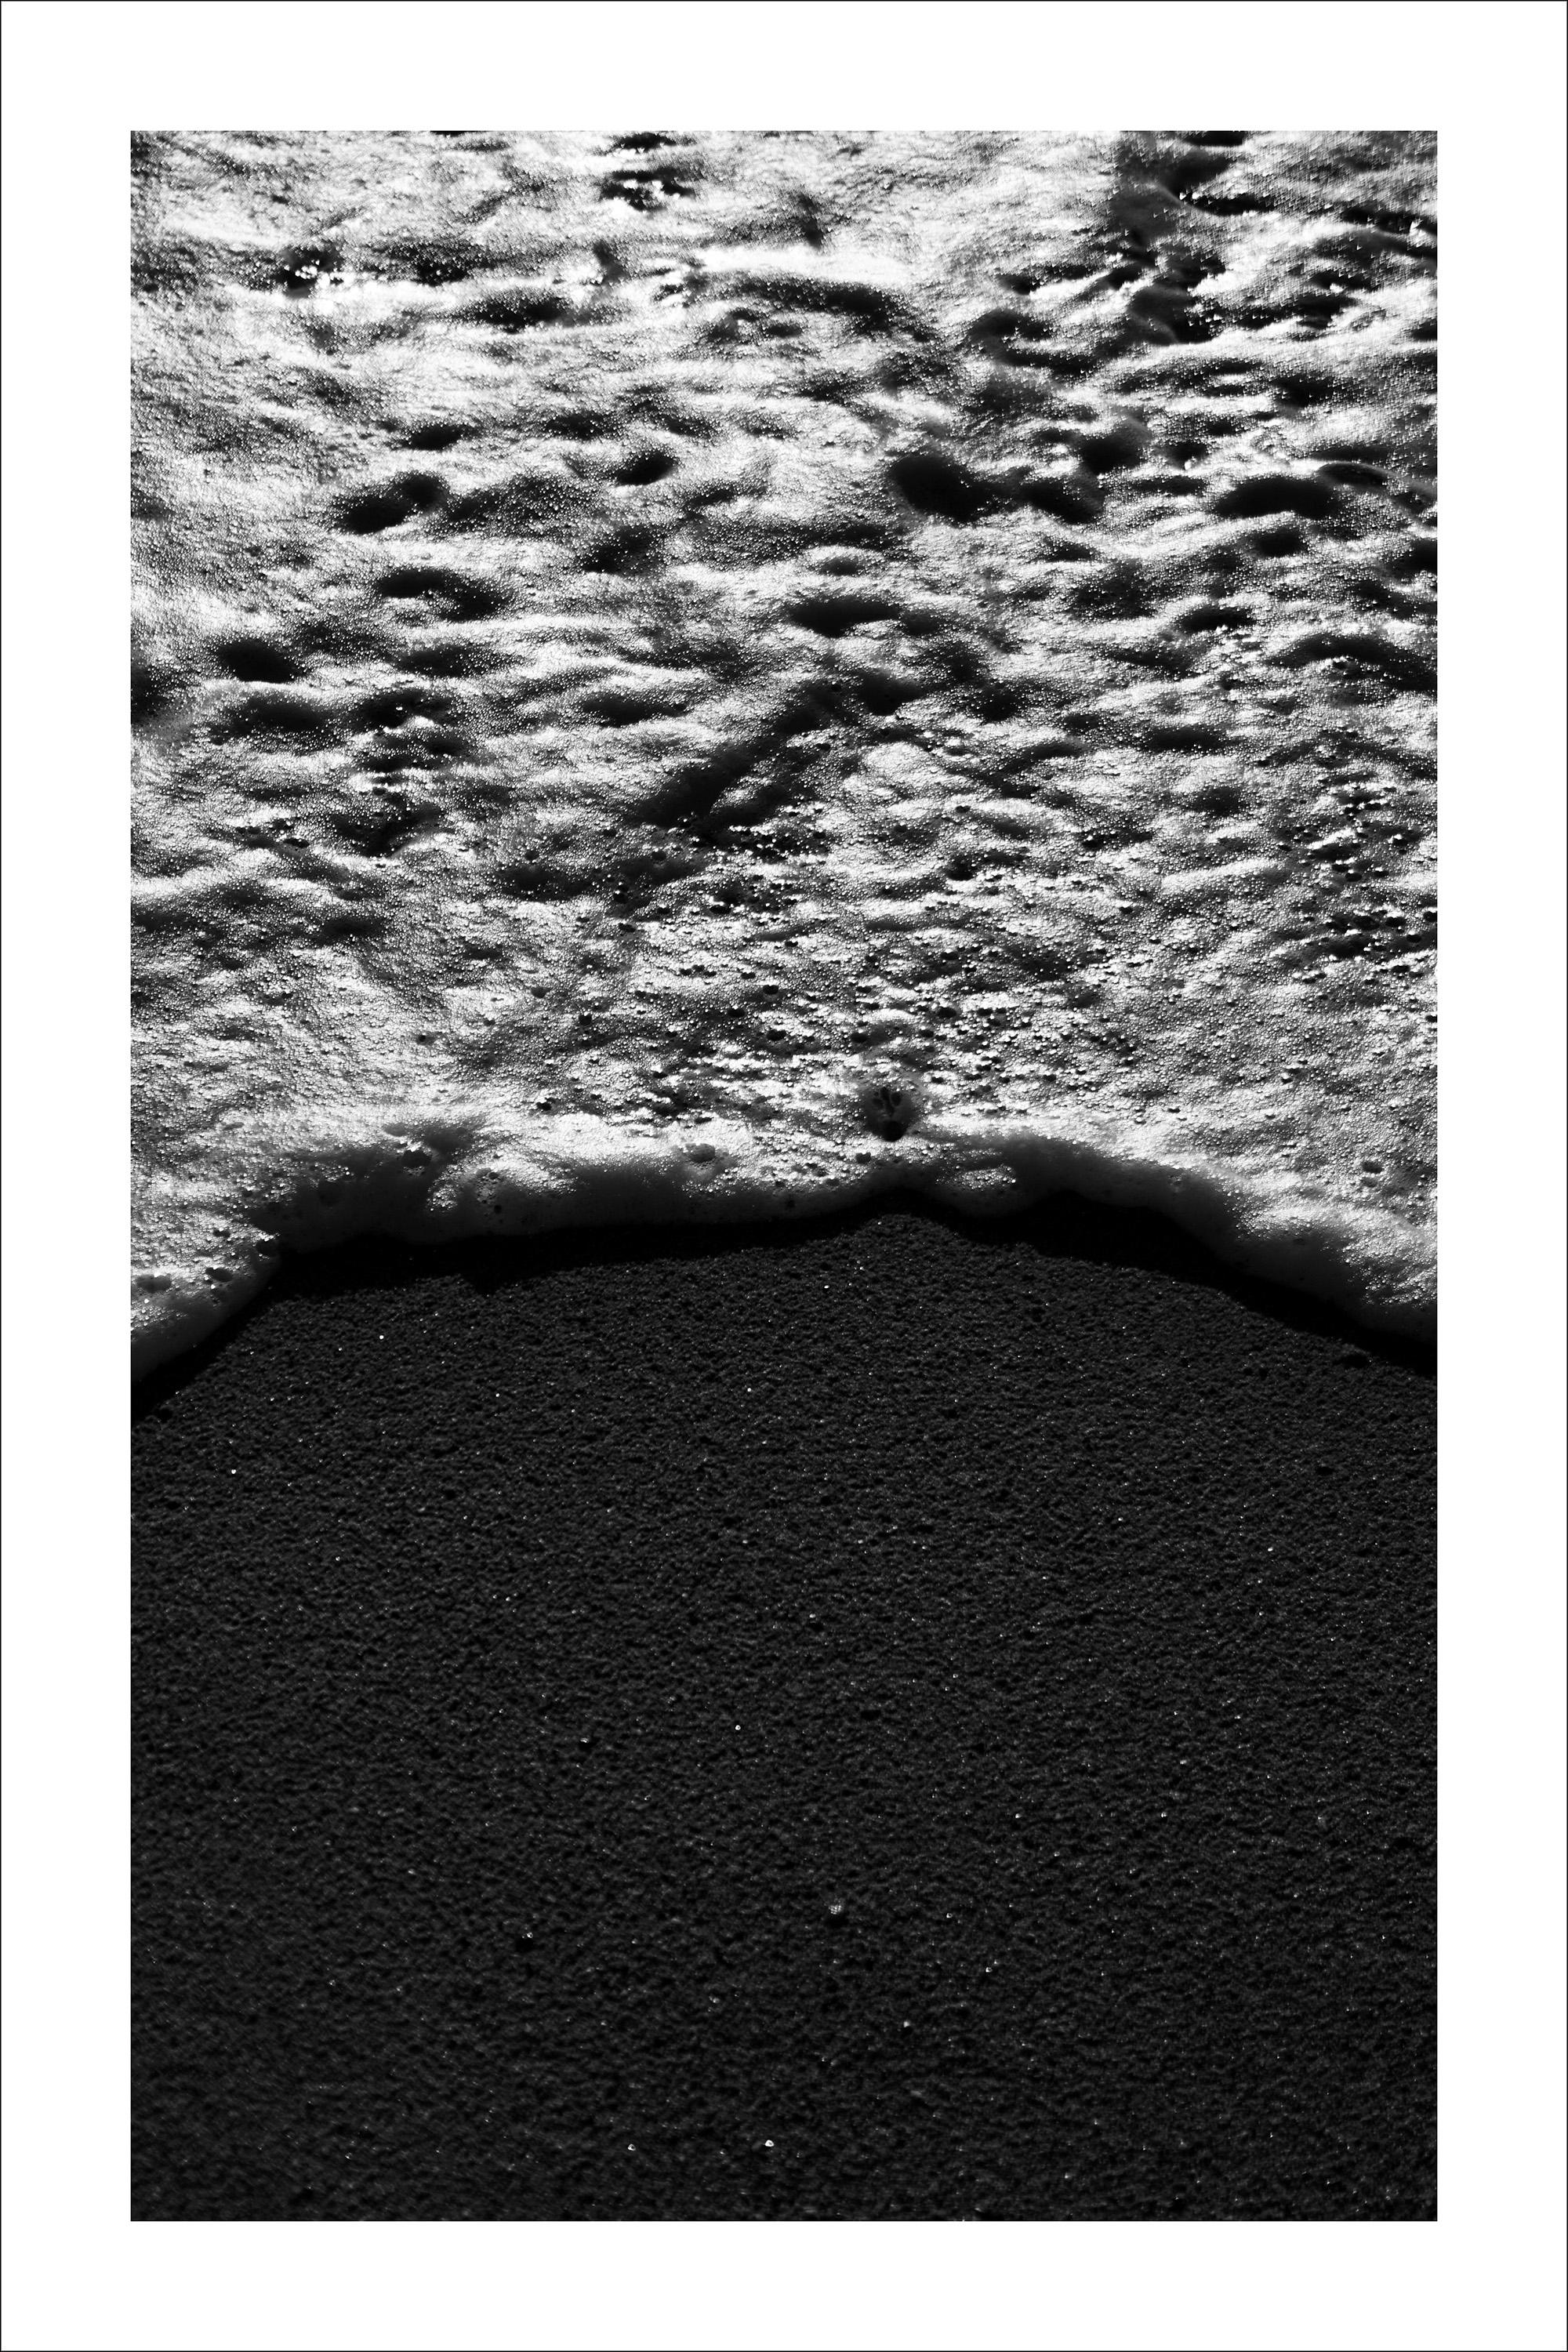 Kind of Cyan Landscape Photograph - Large Vertical Black and White Seascape of Foamy Shore, Sugimoto Style, Shore